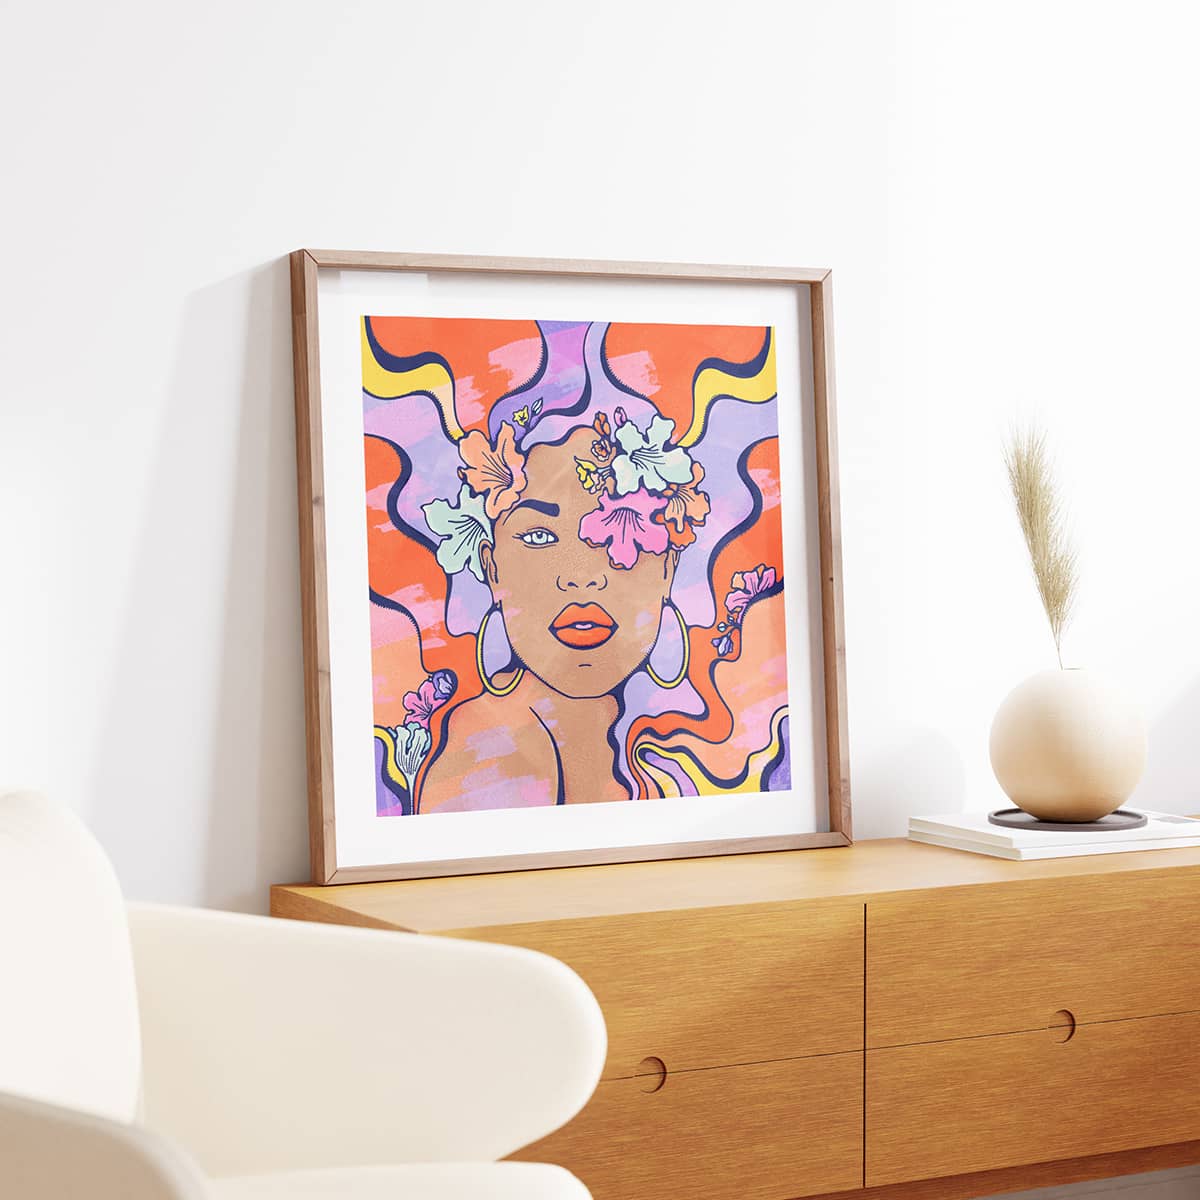 Groovy wall art in wood frame featuring tropical island swirls and a beautiful model portrait illustration